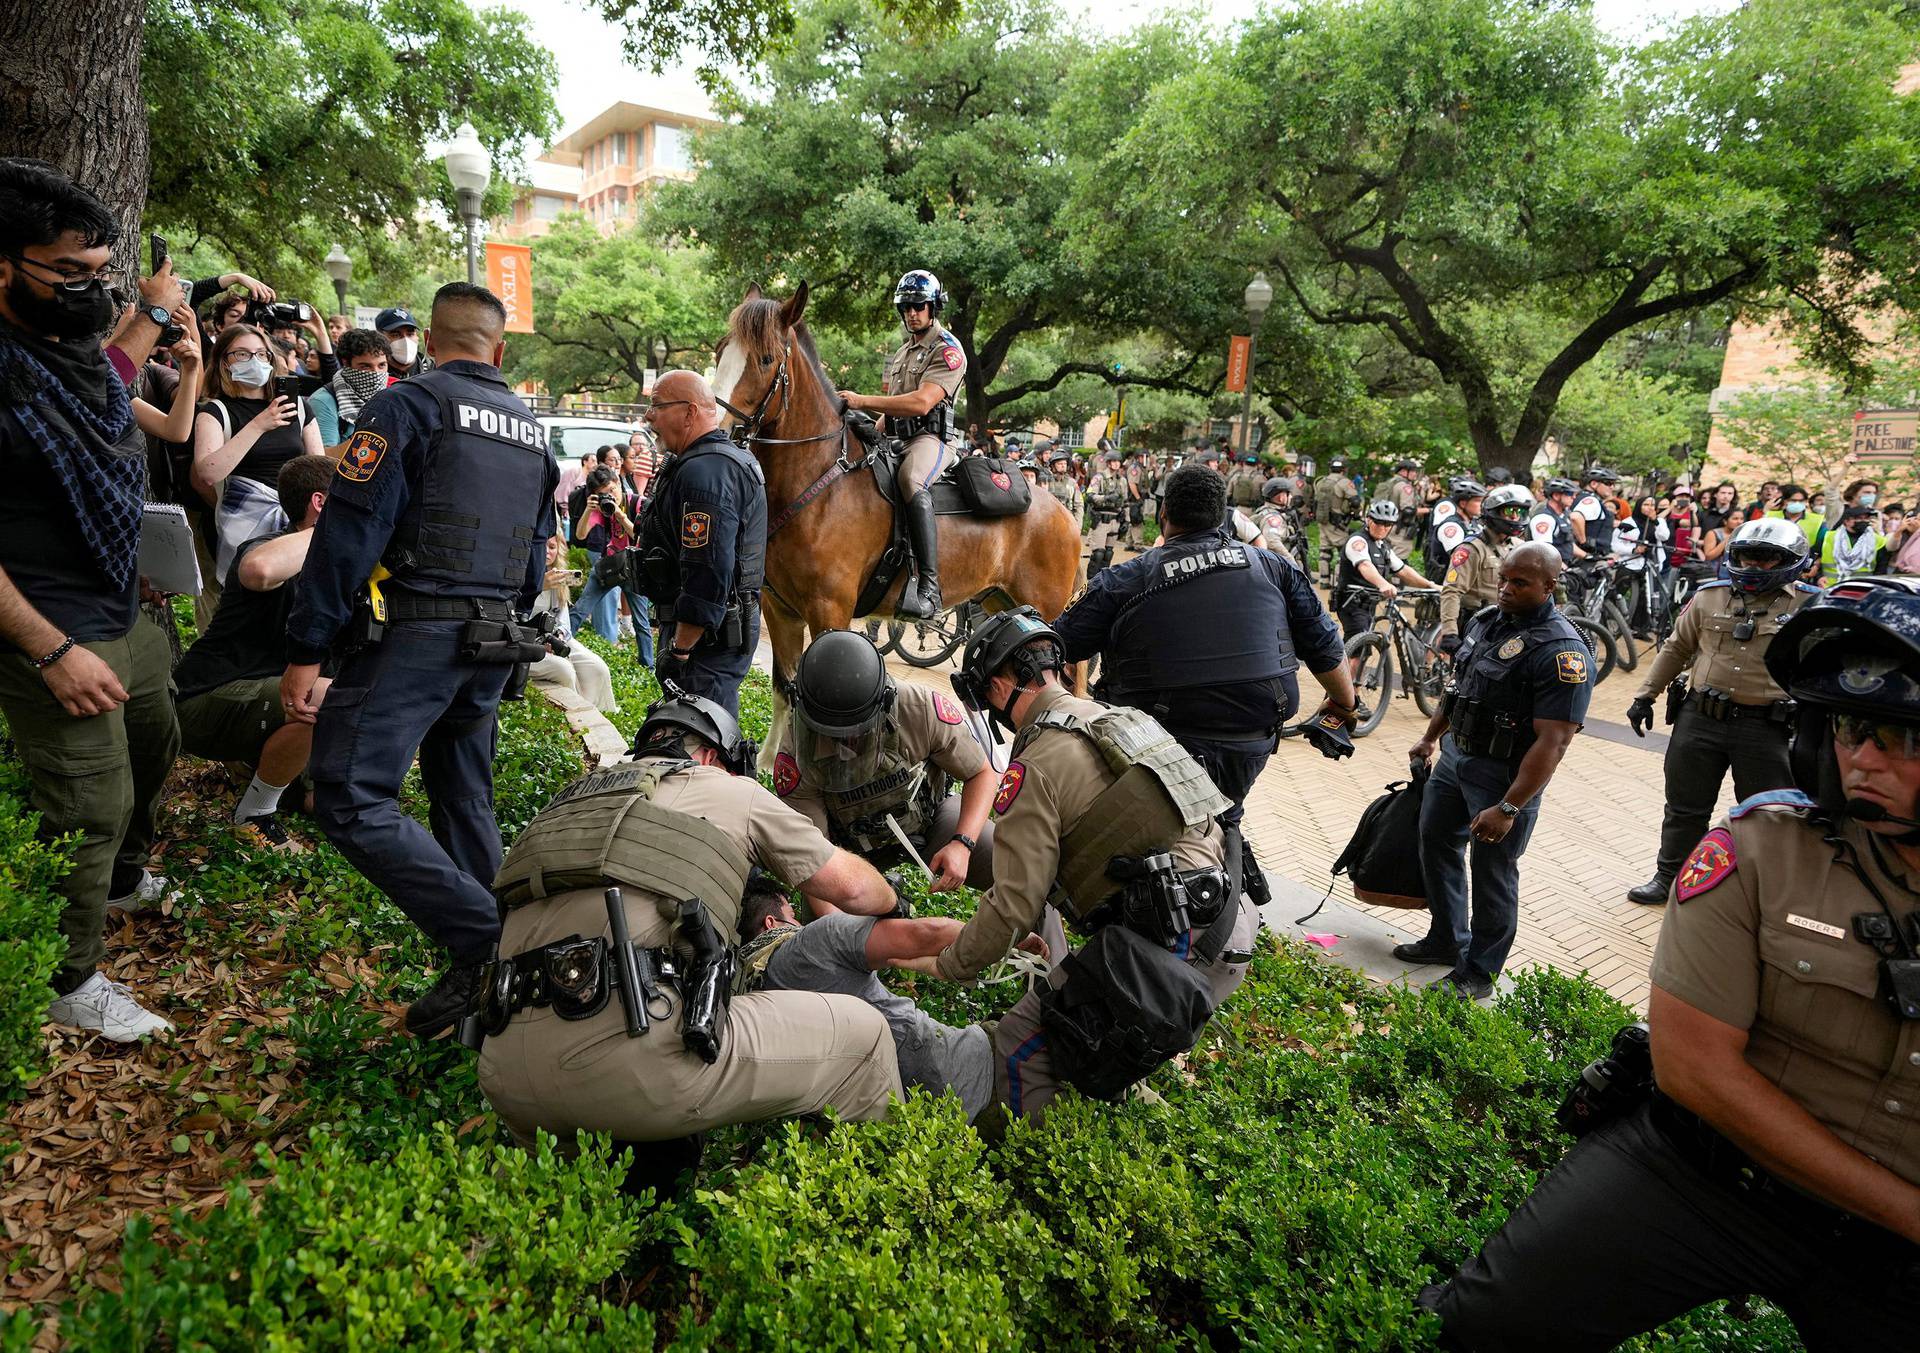 Texas state troopers arrest a man at a pro-Palestinian protest at the University of Texas